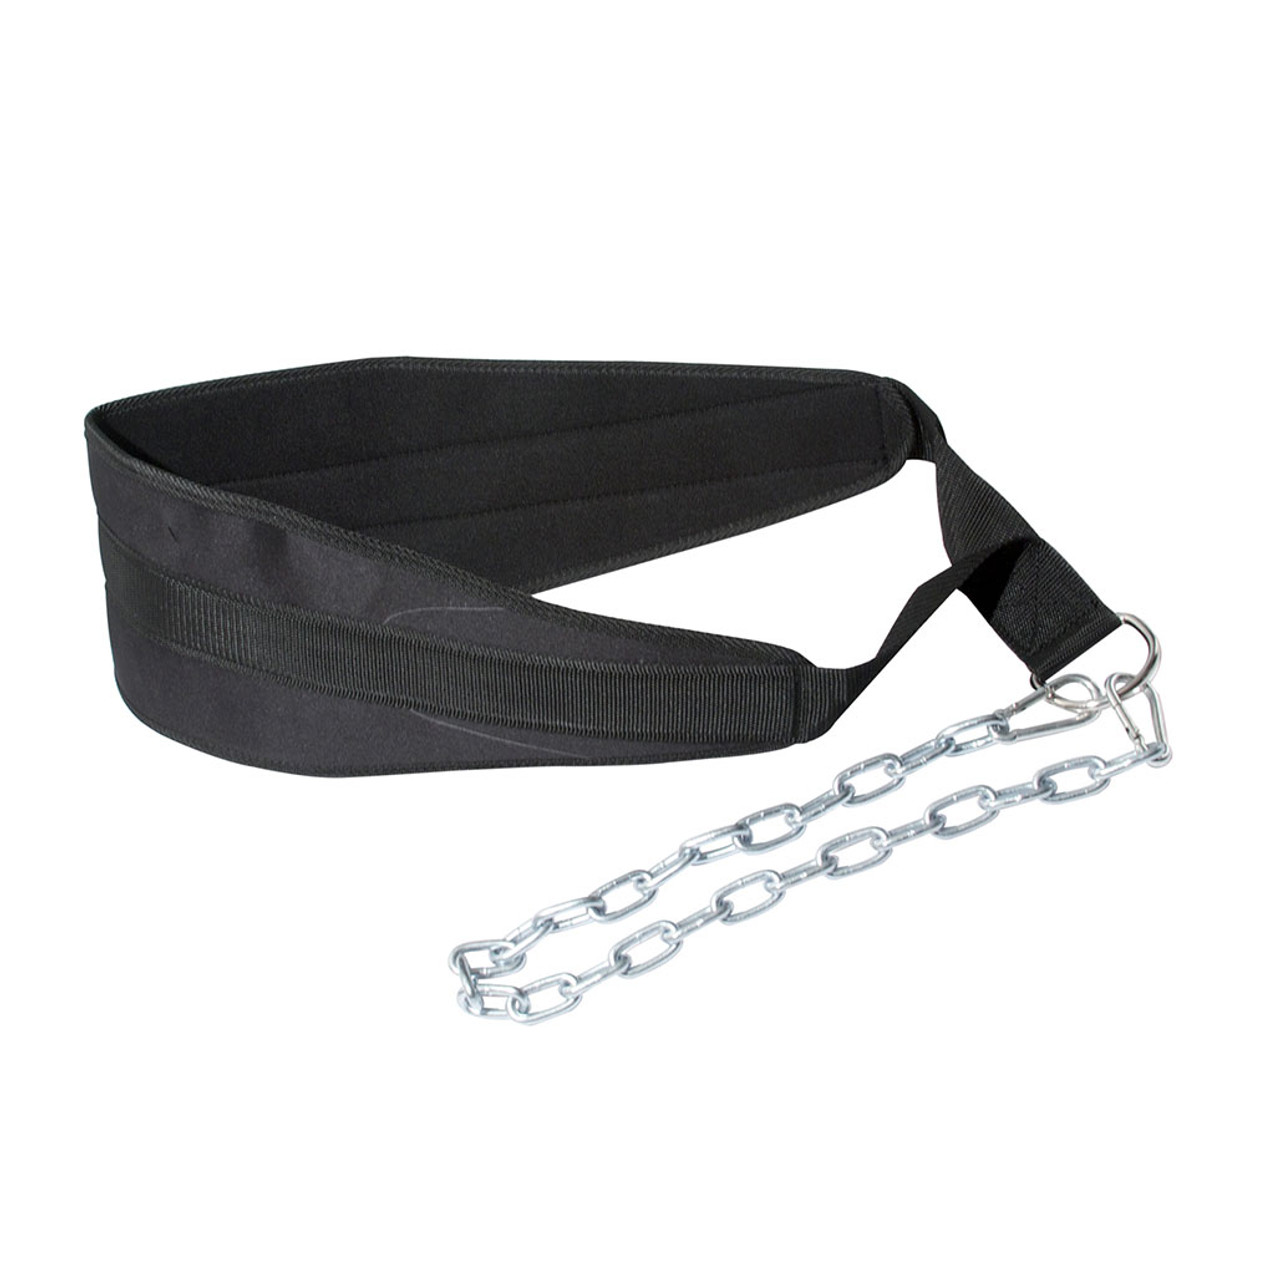 Body-Solid Nylon Dipping Belt with Chain NB56 - Weightlifting Belts Gloves